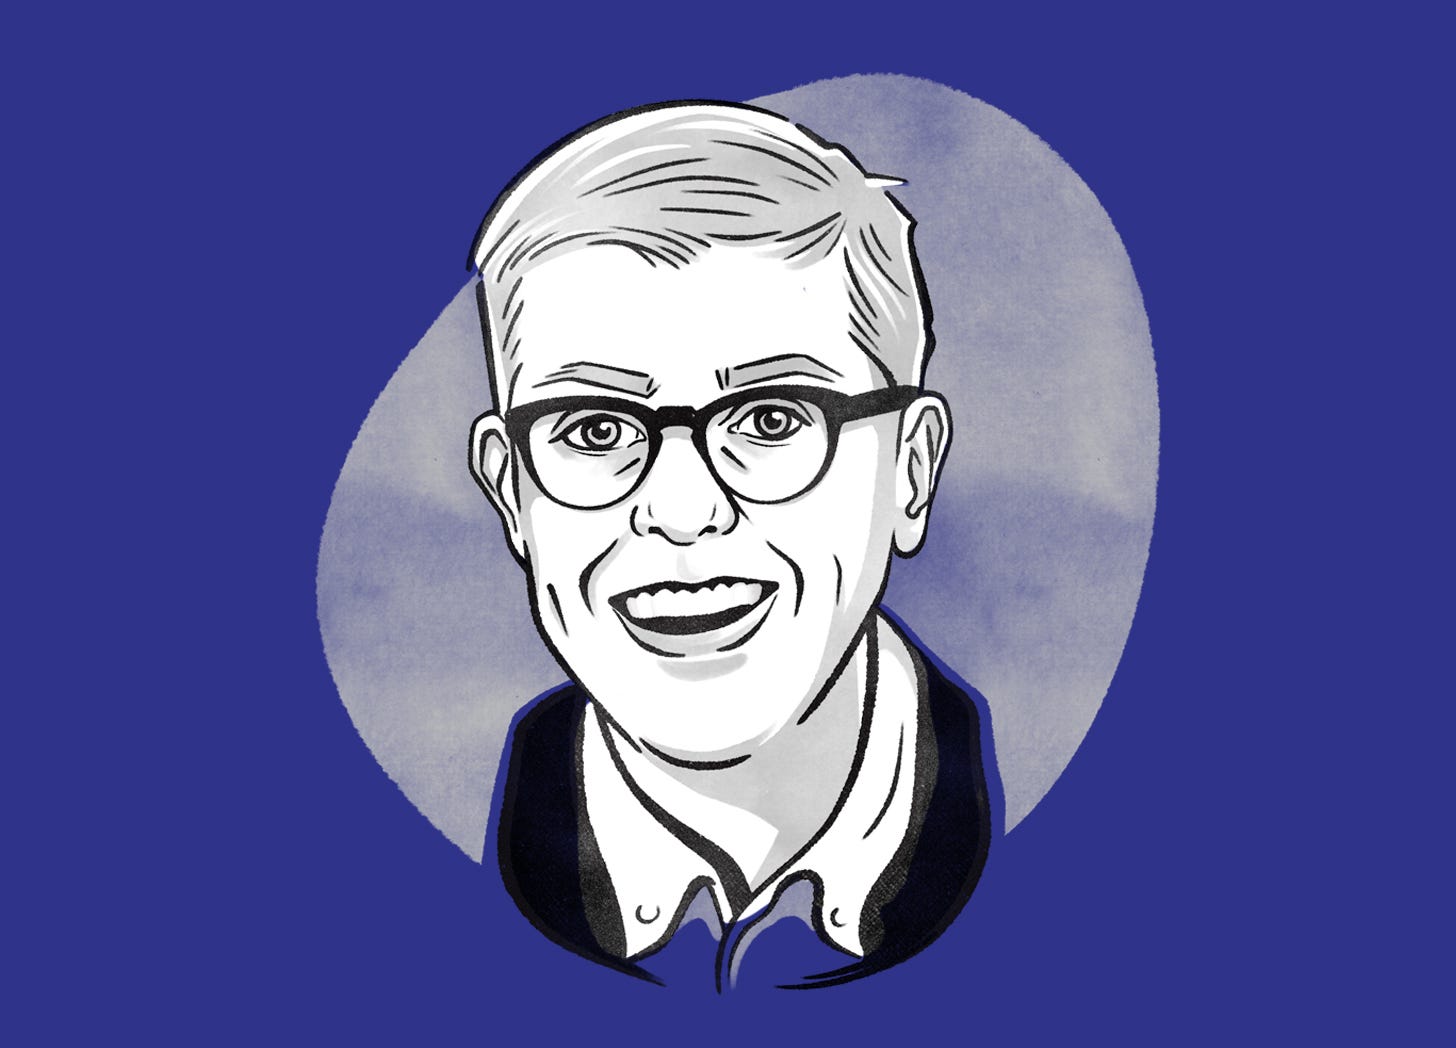 Grayscale illustration of Brian Sholis’s headshot on a dark-blue background. He has short hair, relatively thick-frame glasses, and a button-down shirt.